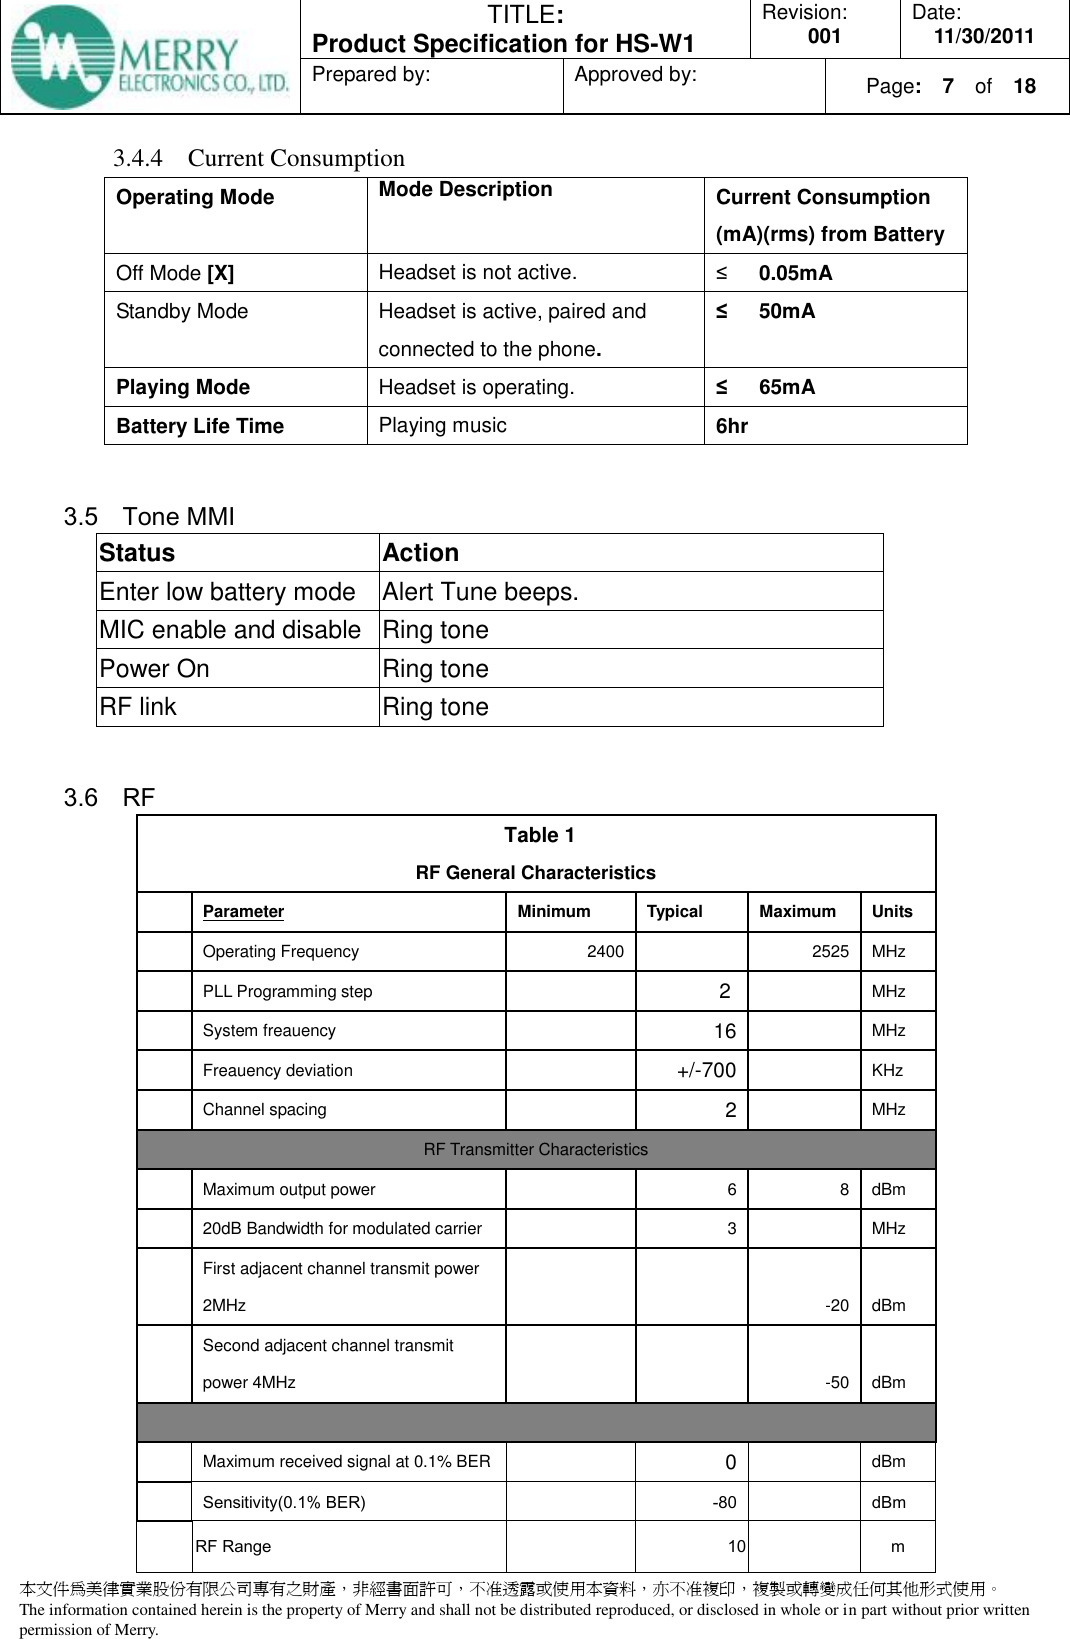  TITLE:  Product Specification for HS-W1 Revision: 001 Date: 11/30/2011 Prepared by:  Approved by:    Page:  7  of    18  本文件為美律實業股份有限公司專有之財產，非經書面許可，不准透露或使用本資料，亦不准複印，複製或轉變成任何其他形式使用。 The information contained herein is the property of Merry and shall not be distributed reproduced, or disclosed in whole or in part without prior written permission of Merry.  3.4.4 Current Consumption Operating Mode Mode Description Current Consumption (mA)(rms) from Battery   Off Mode [X] Headset is not active. ≤      0.05mA Standby Mode  Headset is active, paired and connected to the phone. ≤      50mA      Playing Mode Headset is operating.   ≤   65mA Battery Life Time Playing music 6hr  3.5 Tone MMI           Status Action Enter low battery mode Alert Tune beeps. MIC enable and disable Ring tone   Power On Ring tone RF link Ring tone  3.6 RF    Table 1 RF General Characteristics   Parameter Minimum Typical Maximum Units  Operating Frequency 2400   2525 MHz   PLL Programming step  2   MHz  System freauency  16  MHz  Freauency deviation  +/-700  KHz  Channel spacing  2  MHz RF Transmitter Characteristics   Maximum output power  6 8 dBm   20dB Bandwidth for modulated carrier  3  MHz   First adjacent channel transmit power 2MHz    -20 dBm   Second adjacent channel transmit power 4MHz   -50 dBm     Maximum received signal at 0.1% BER  0  dBm   Sensitivity(0.1% BER)  -80  dBm  RF Range  10  m 